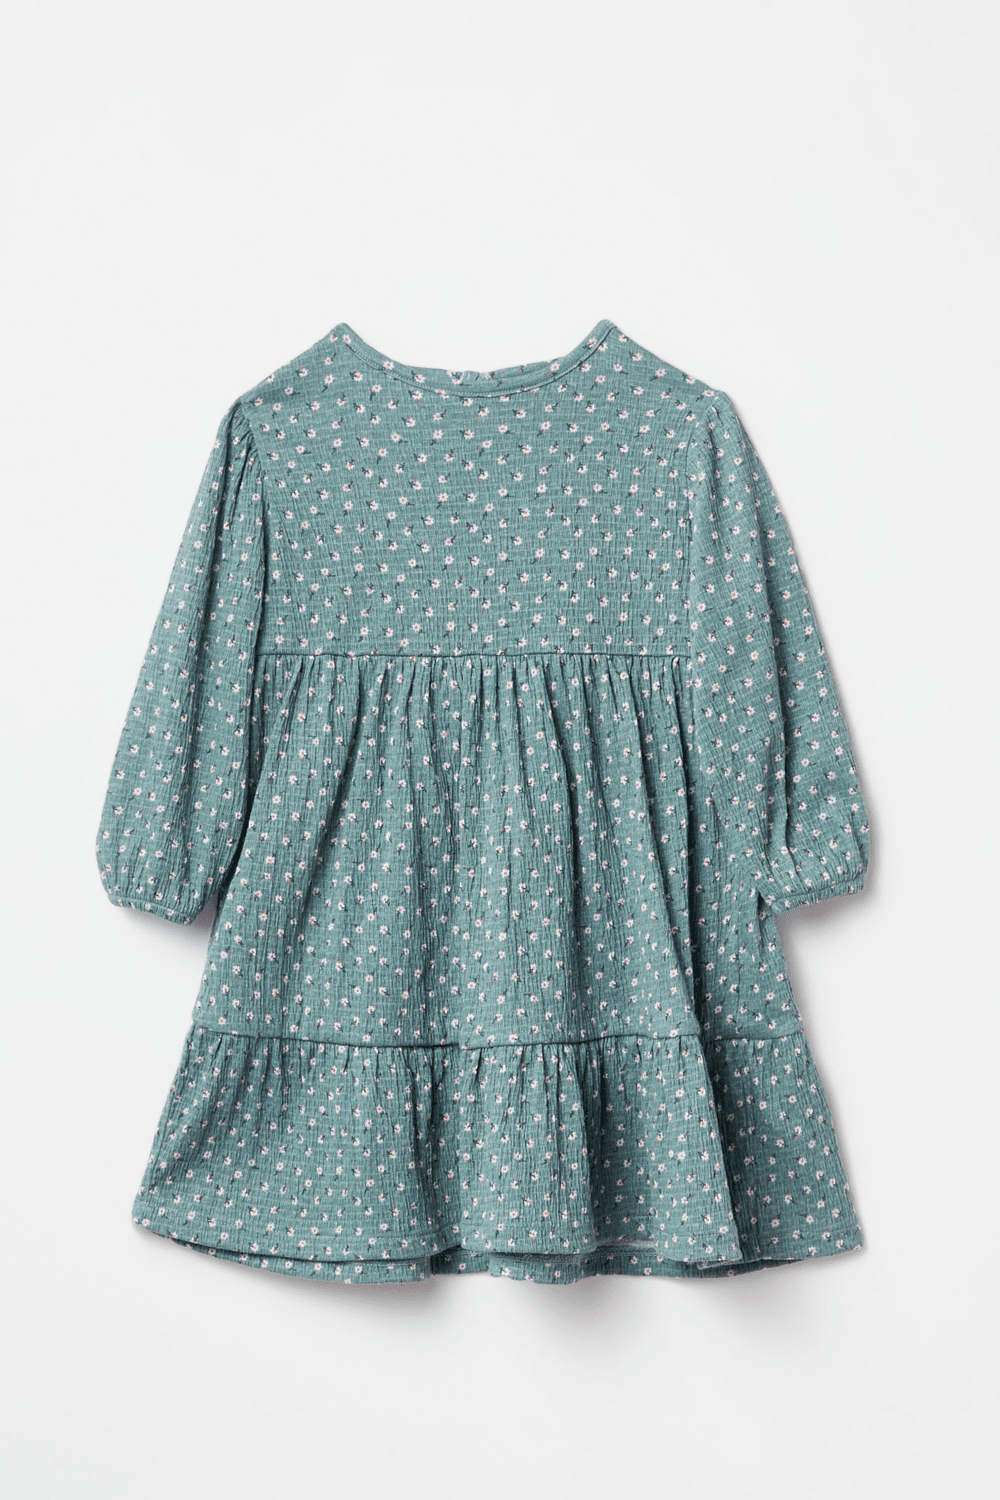 Sfera Floral Tiered Dress - Green 1 Shaws Department Stores